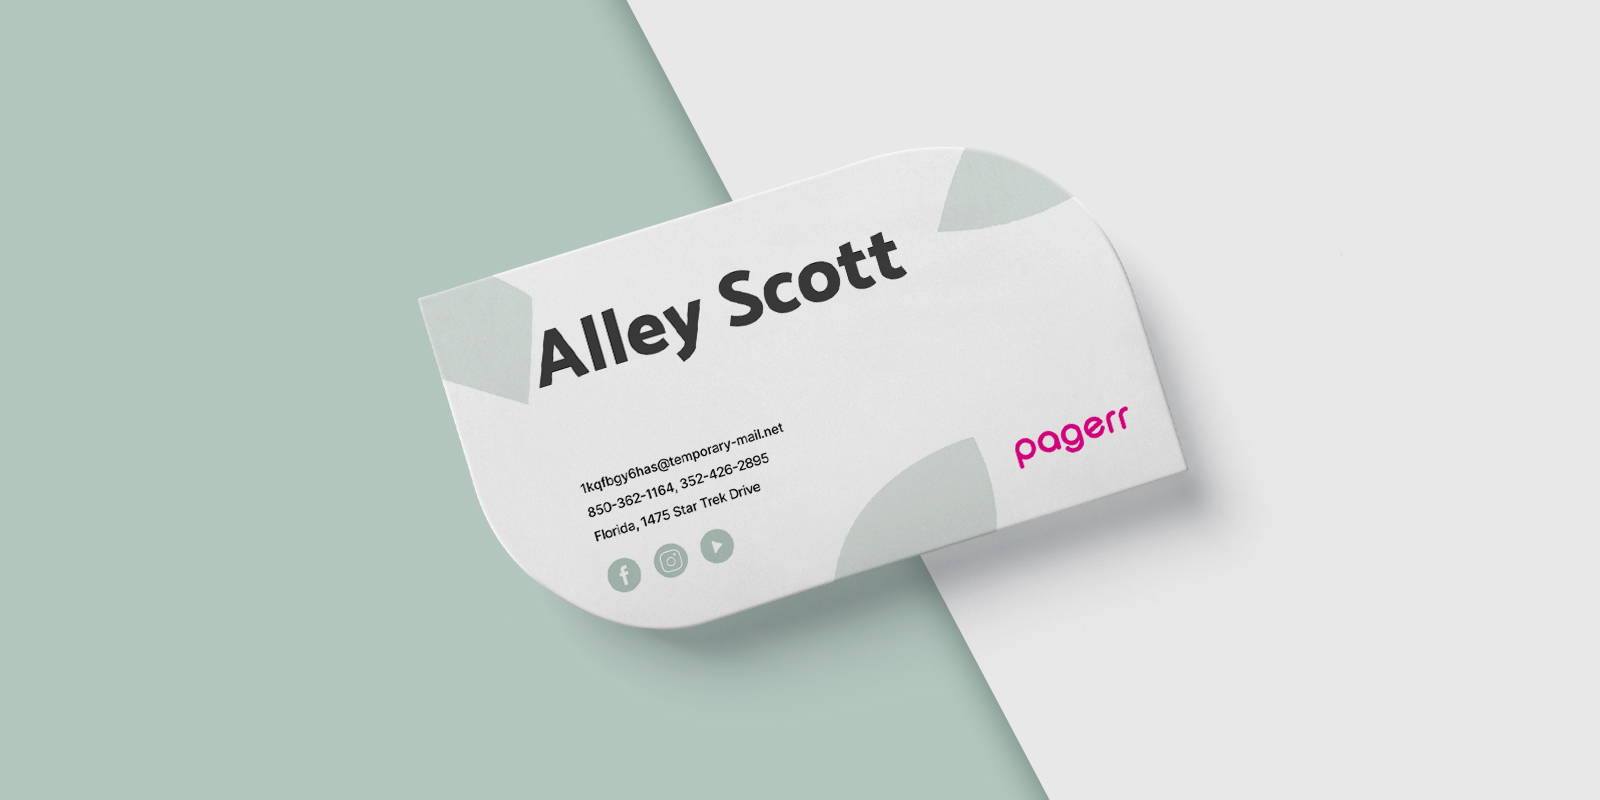 Special shape business cards in Valencia - Print with Pagerr